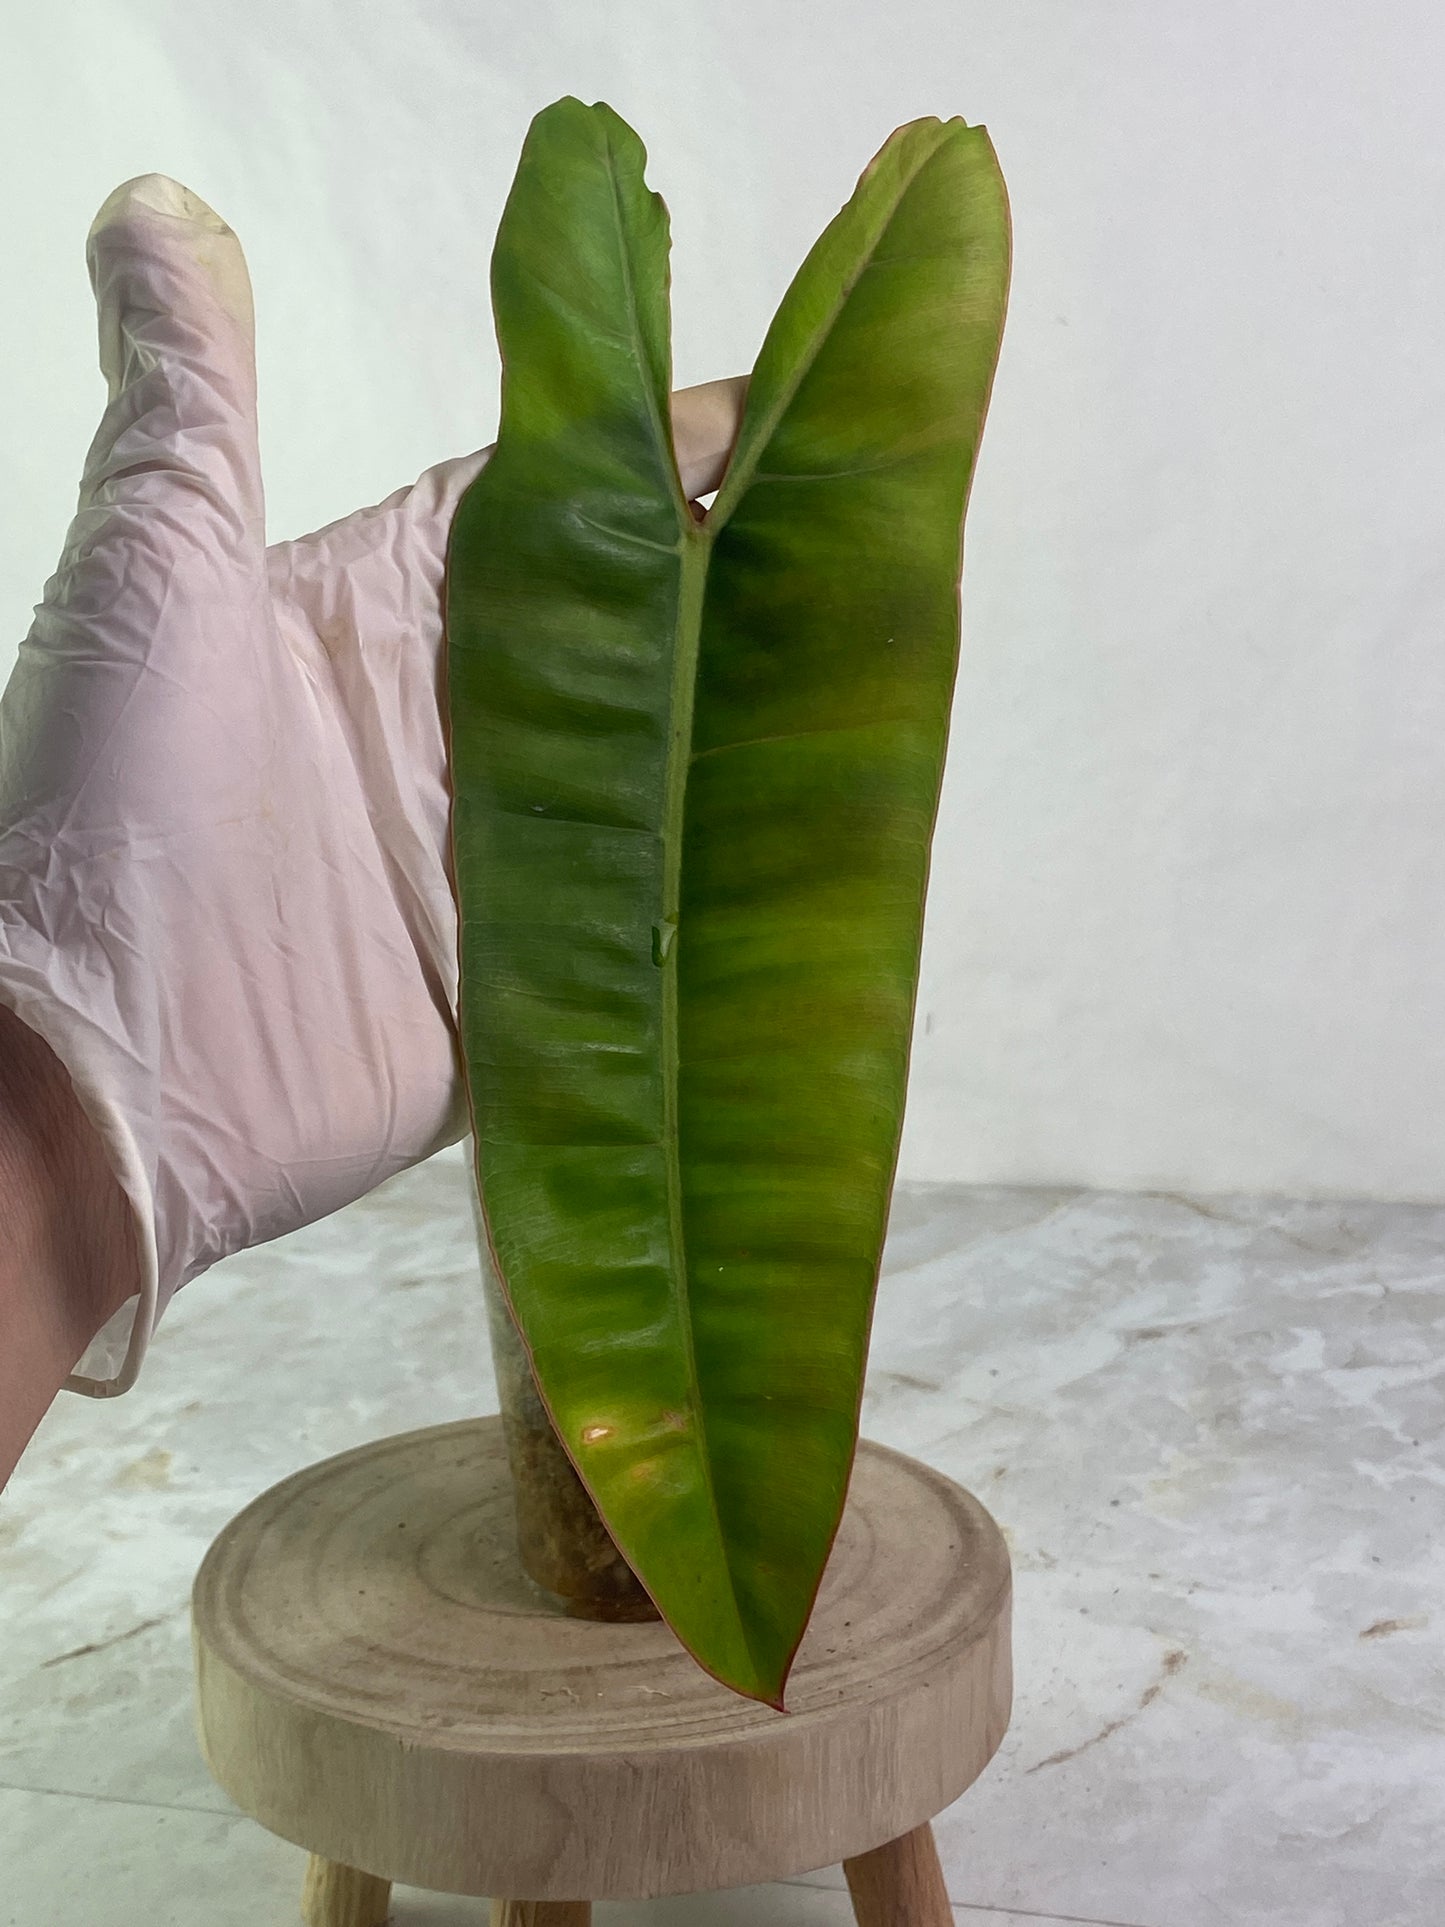 Philodendron Billietiae slightly rooted 1 leaf 1 bud